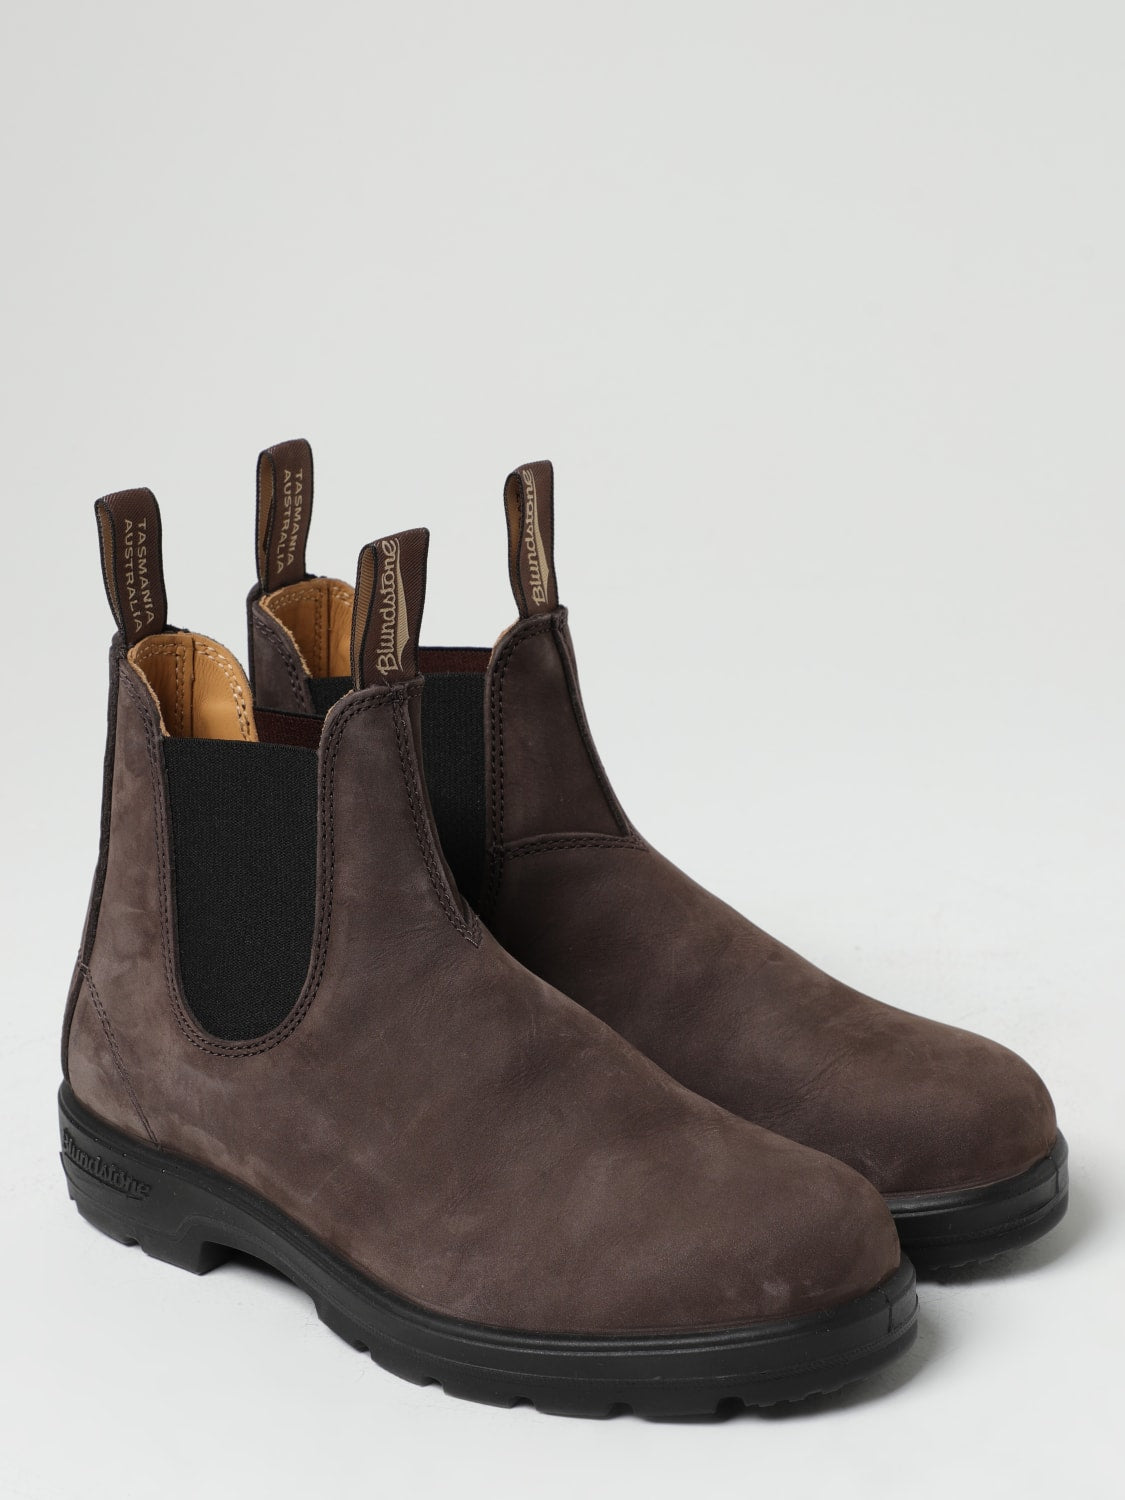 Blundstone Boots - Brown